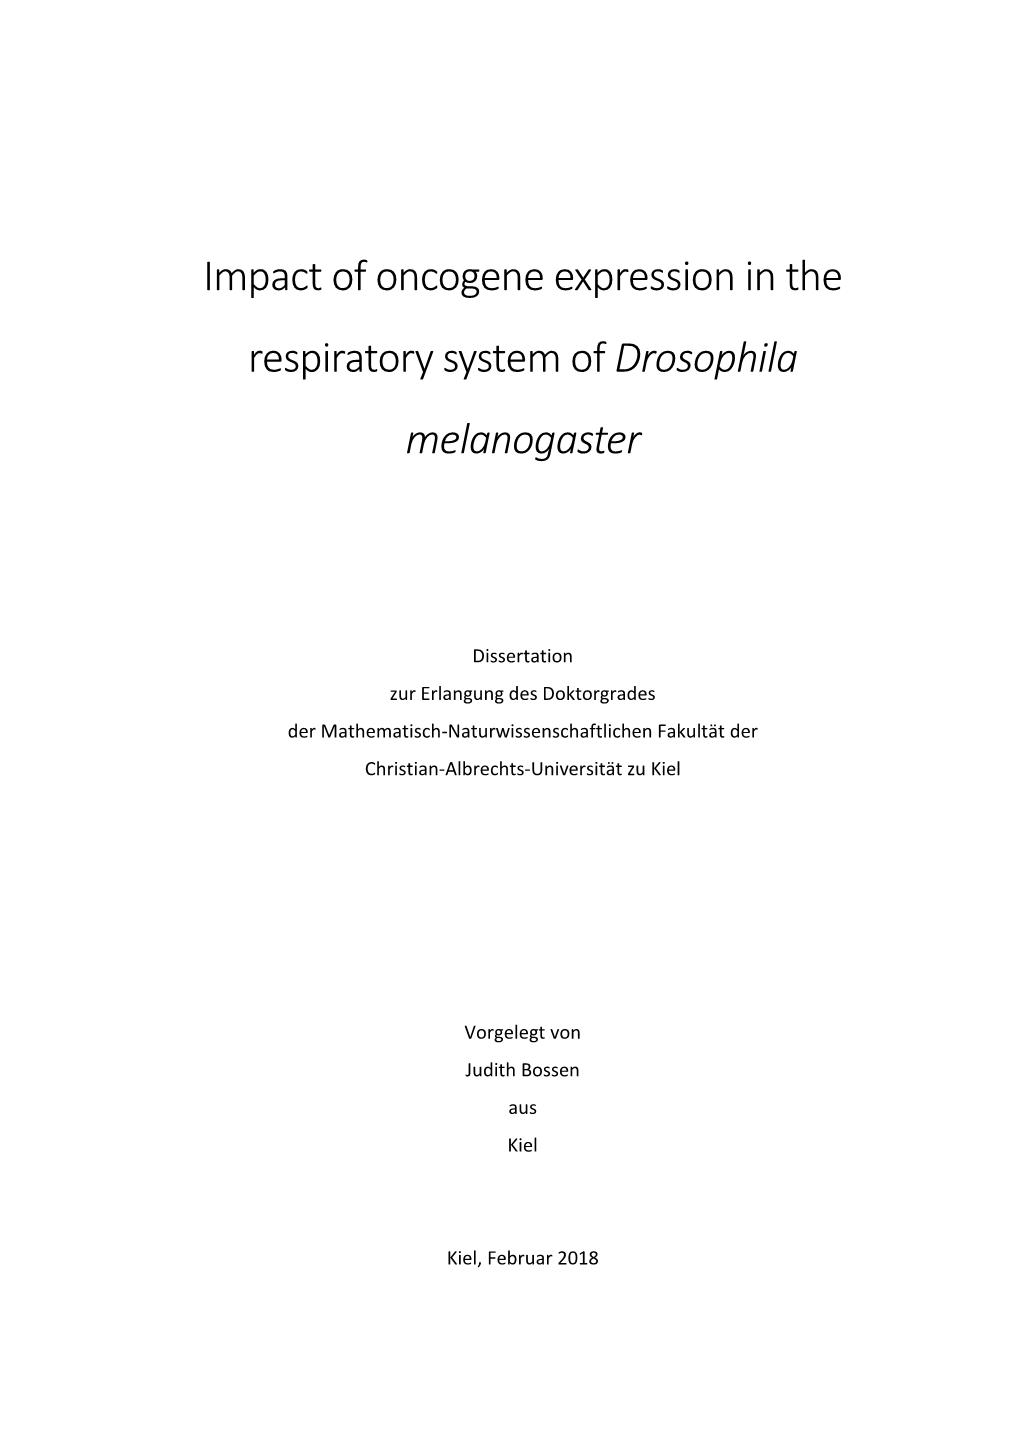 Impact of Oncogene Expression in the Respiratory System of Drosophila